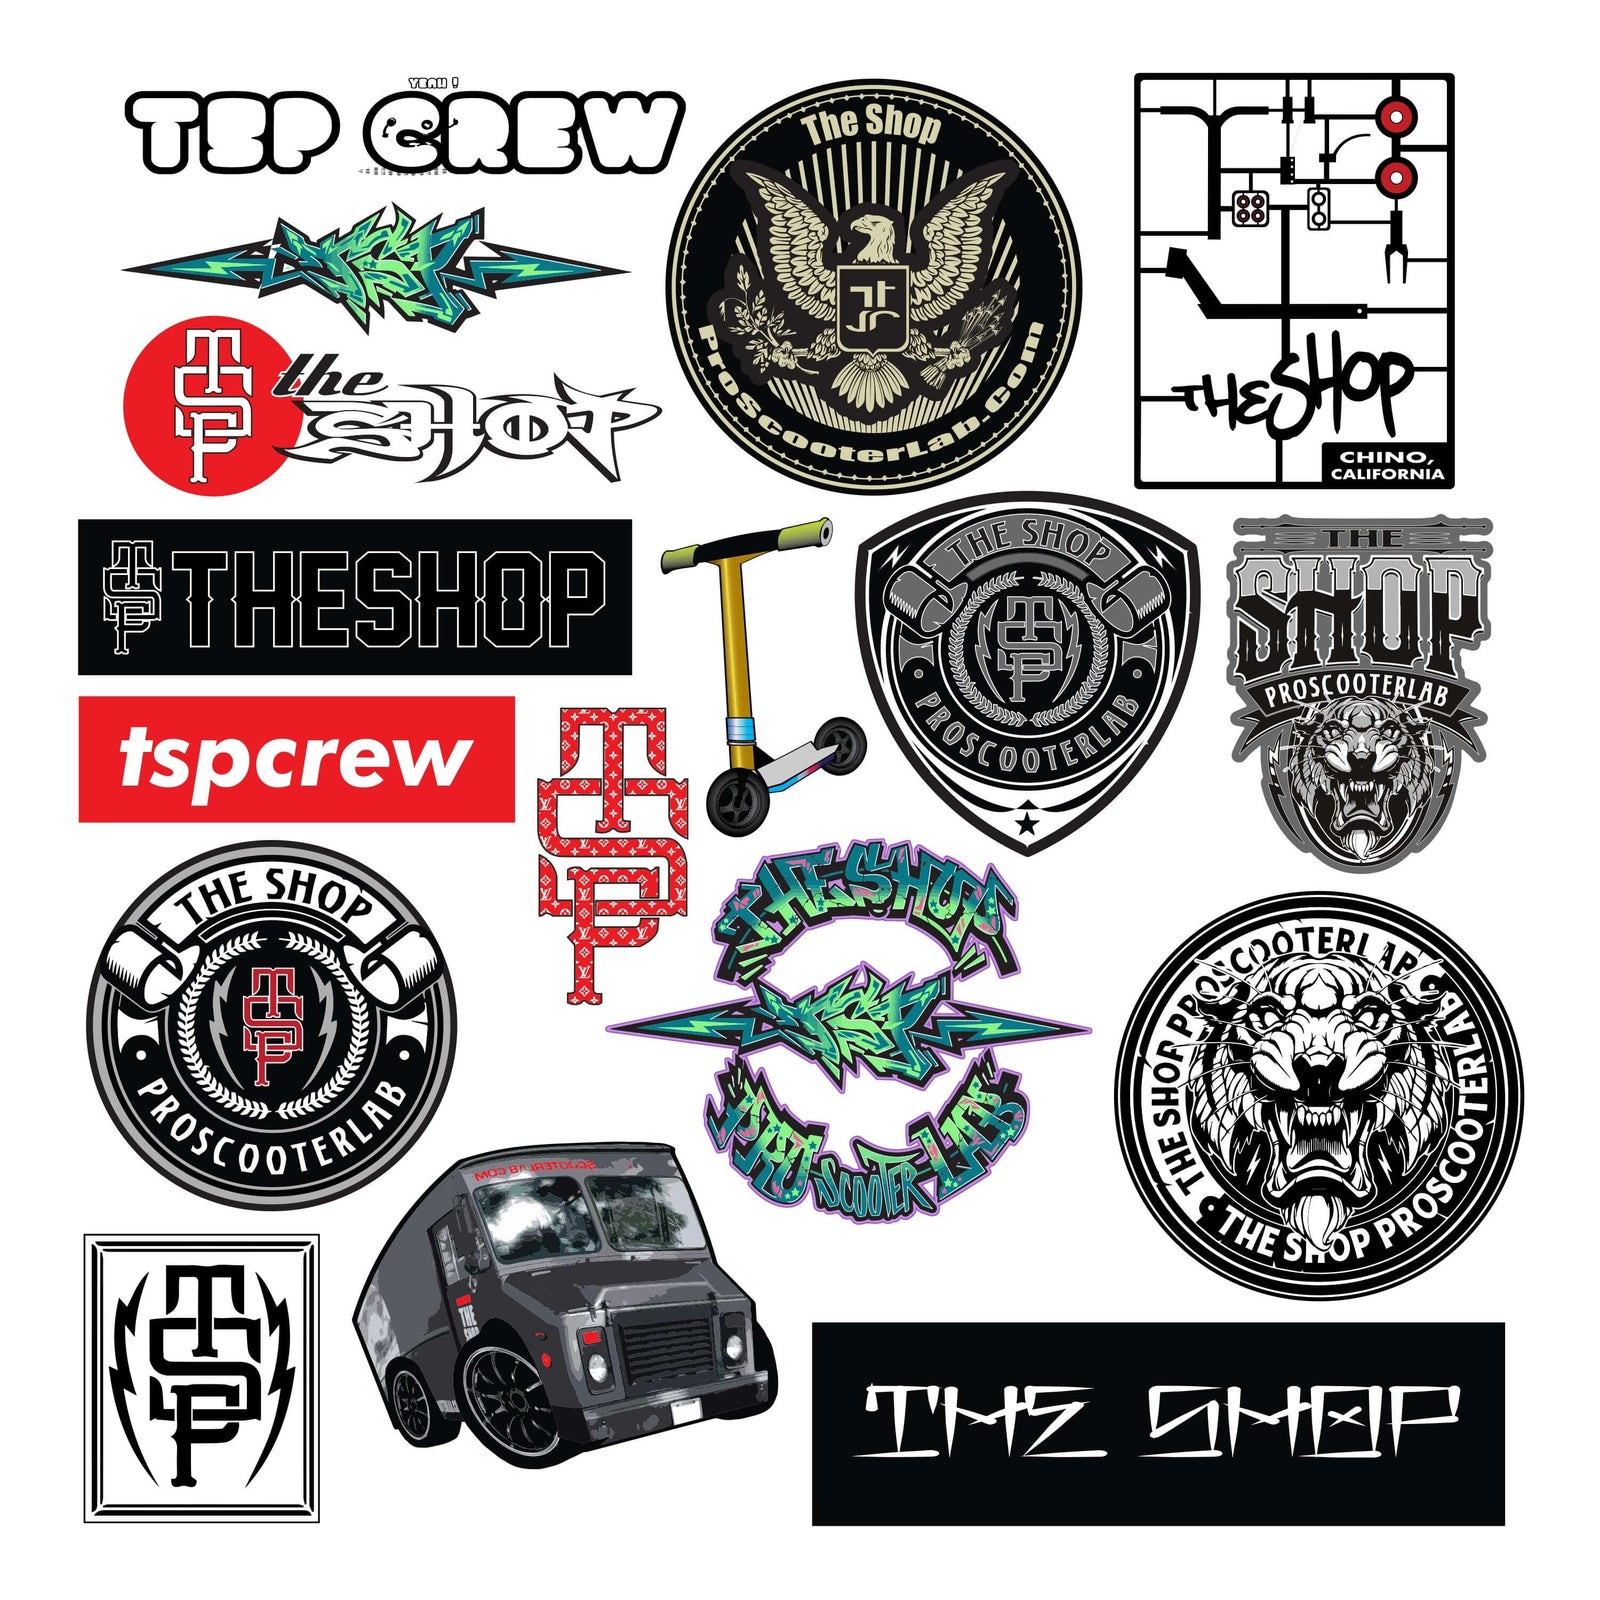 Need Cool Scooter Stickers? | The Shop Pro Scooter